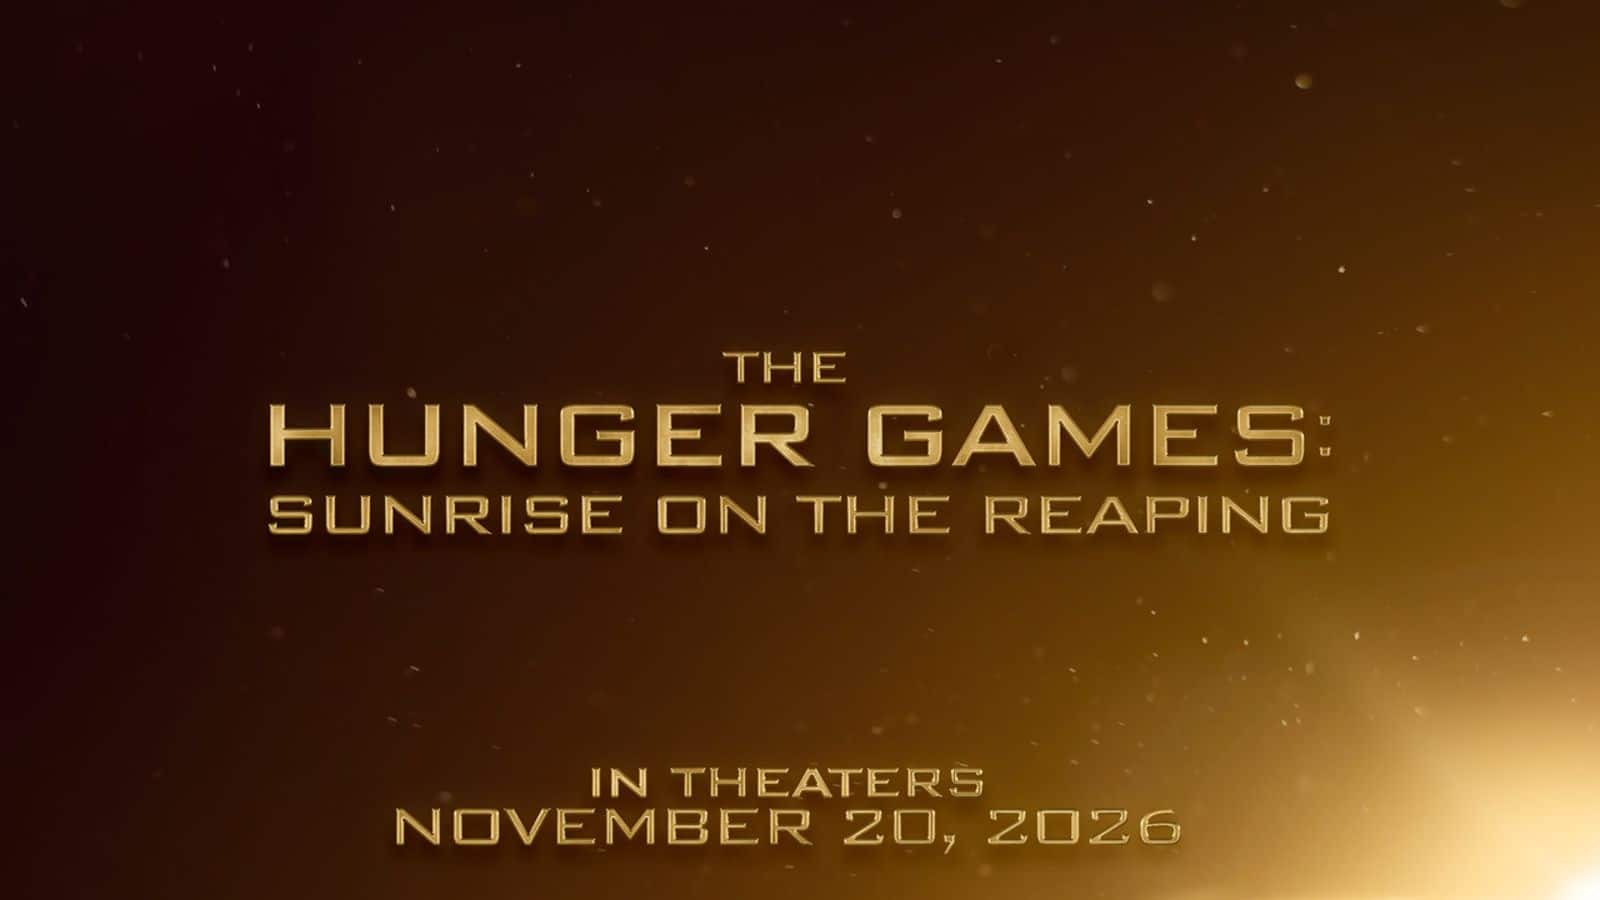 New 'The Hunger Games' prequel announced for 2026 release